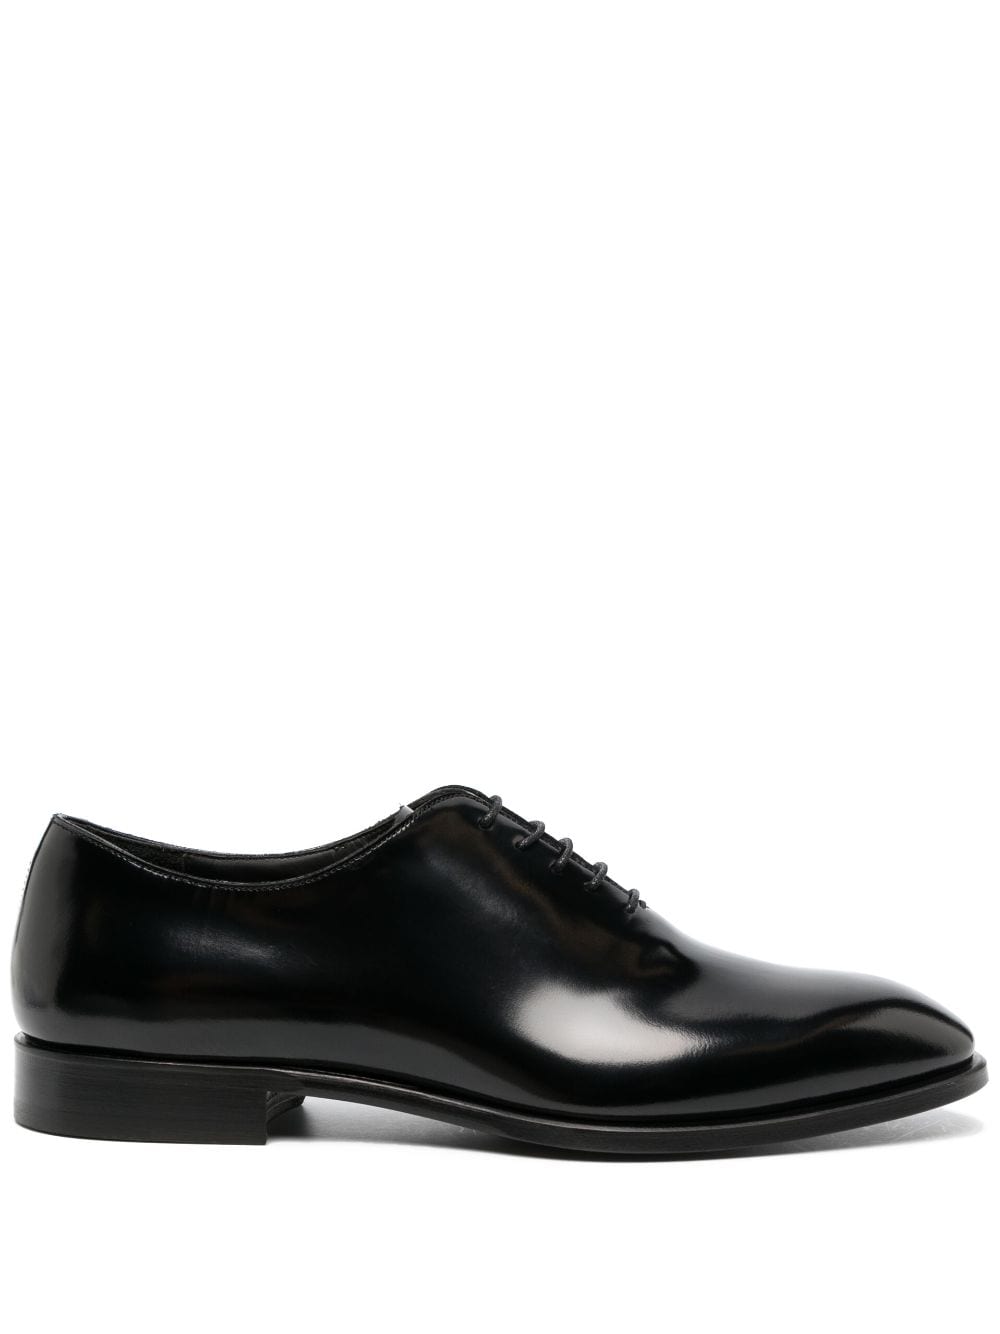 CANALI PATENT-FINISH LEATHER OXFORD SHOES